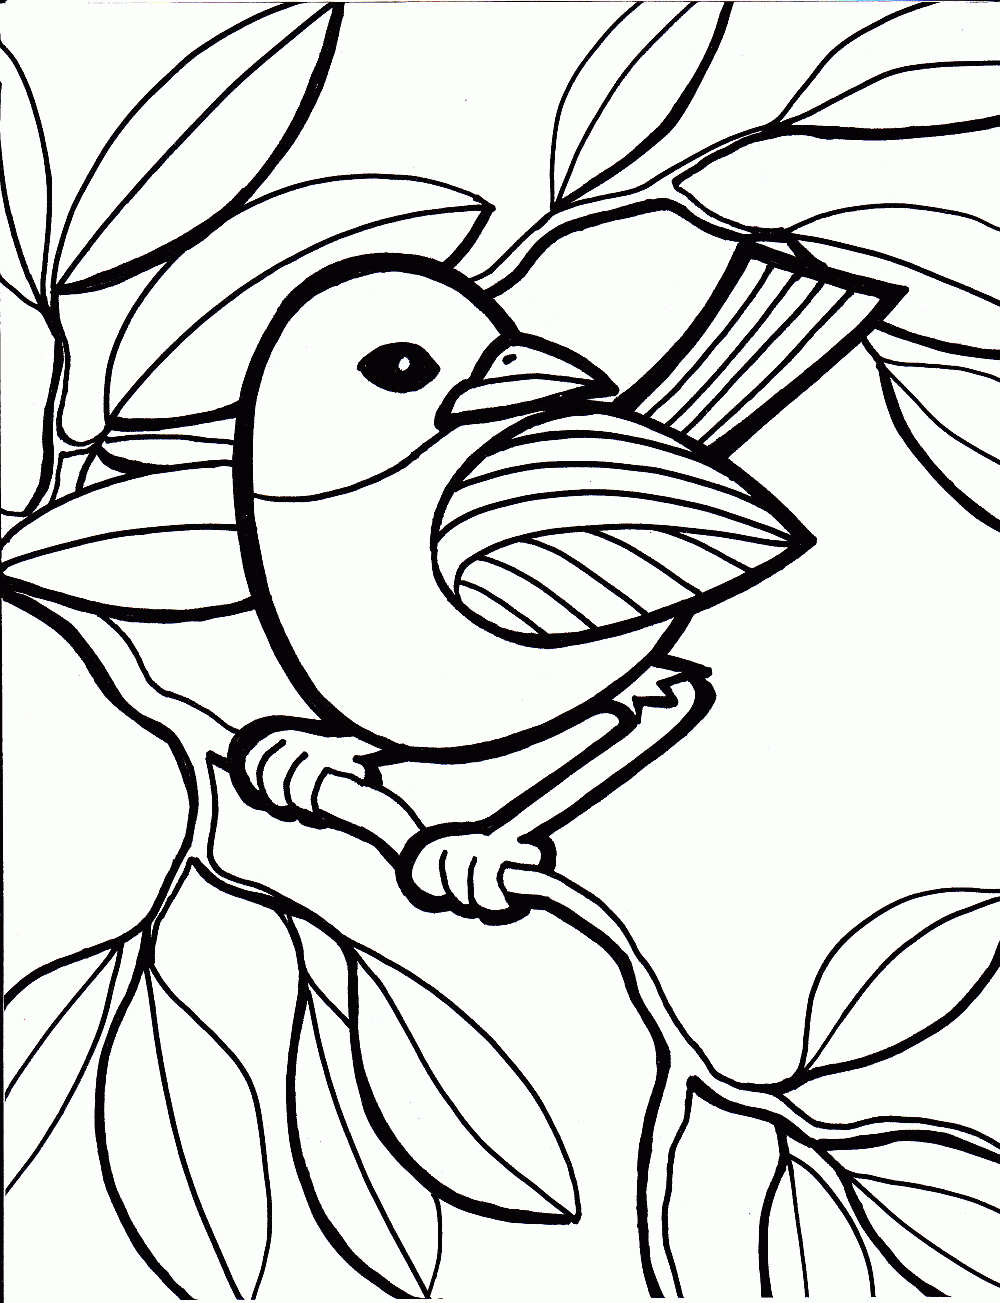 coloring pages for halloween - High Quality Coloring Pages